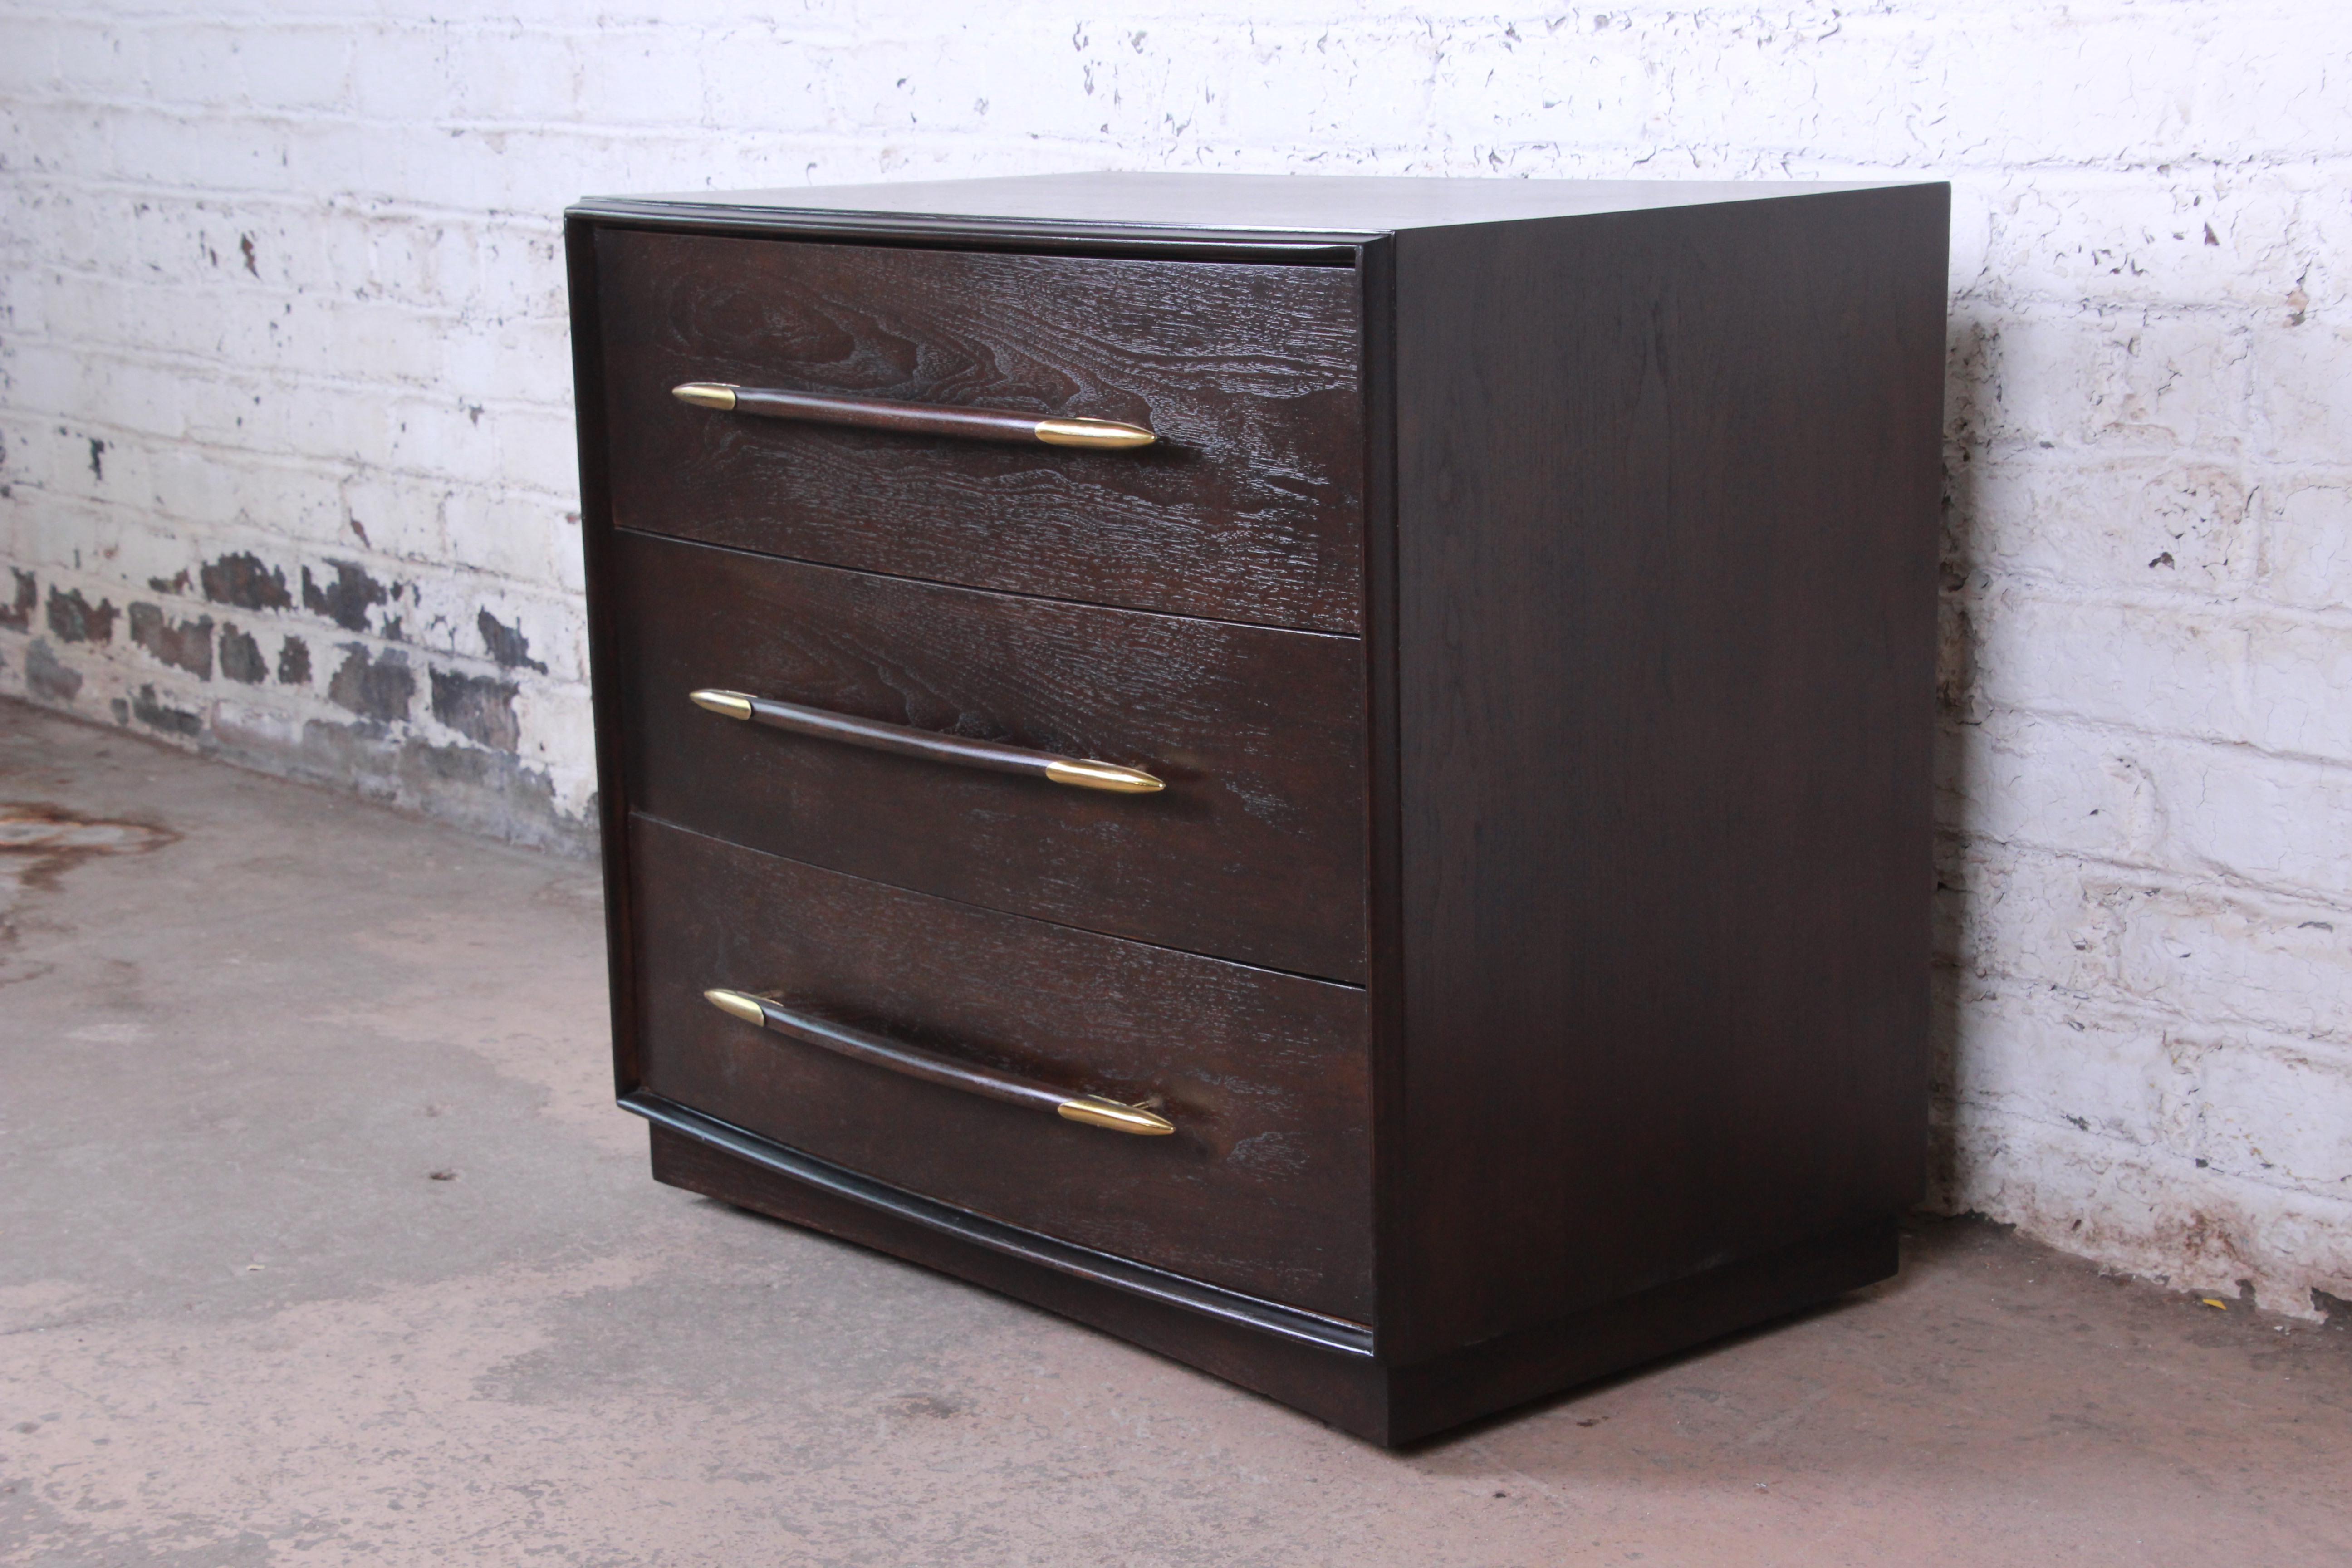 Offering an outstanding Mid-Century Modern three-drawer bachelor chest or large nightstand designed by T.H. Robsjohn-Gibbings for Widdicomb. The chest features gorgeous walnut wood grain and unique original spear-shaped drawer pulls. The walnut case